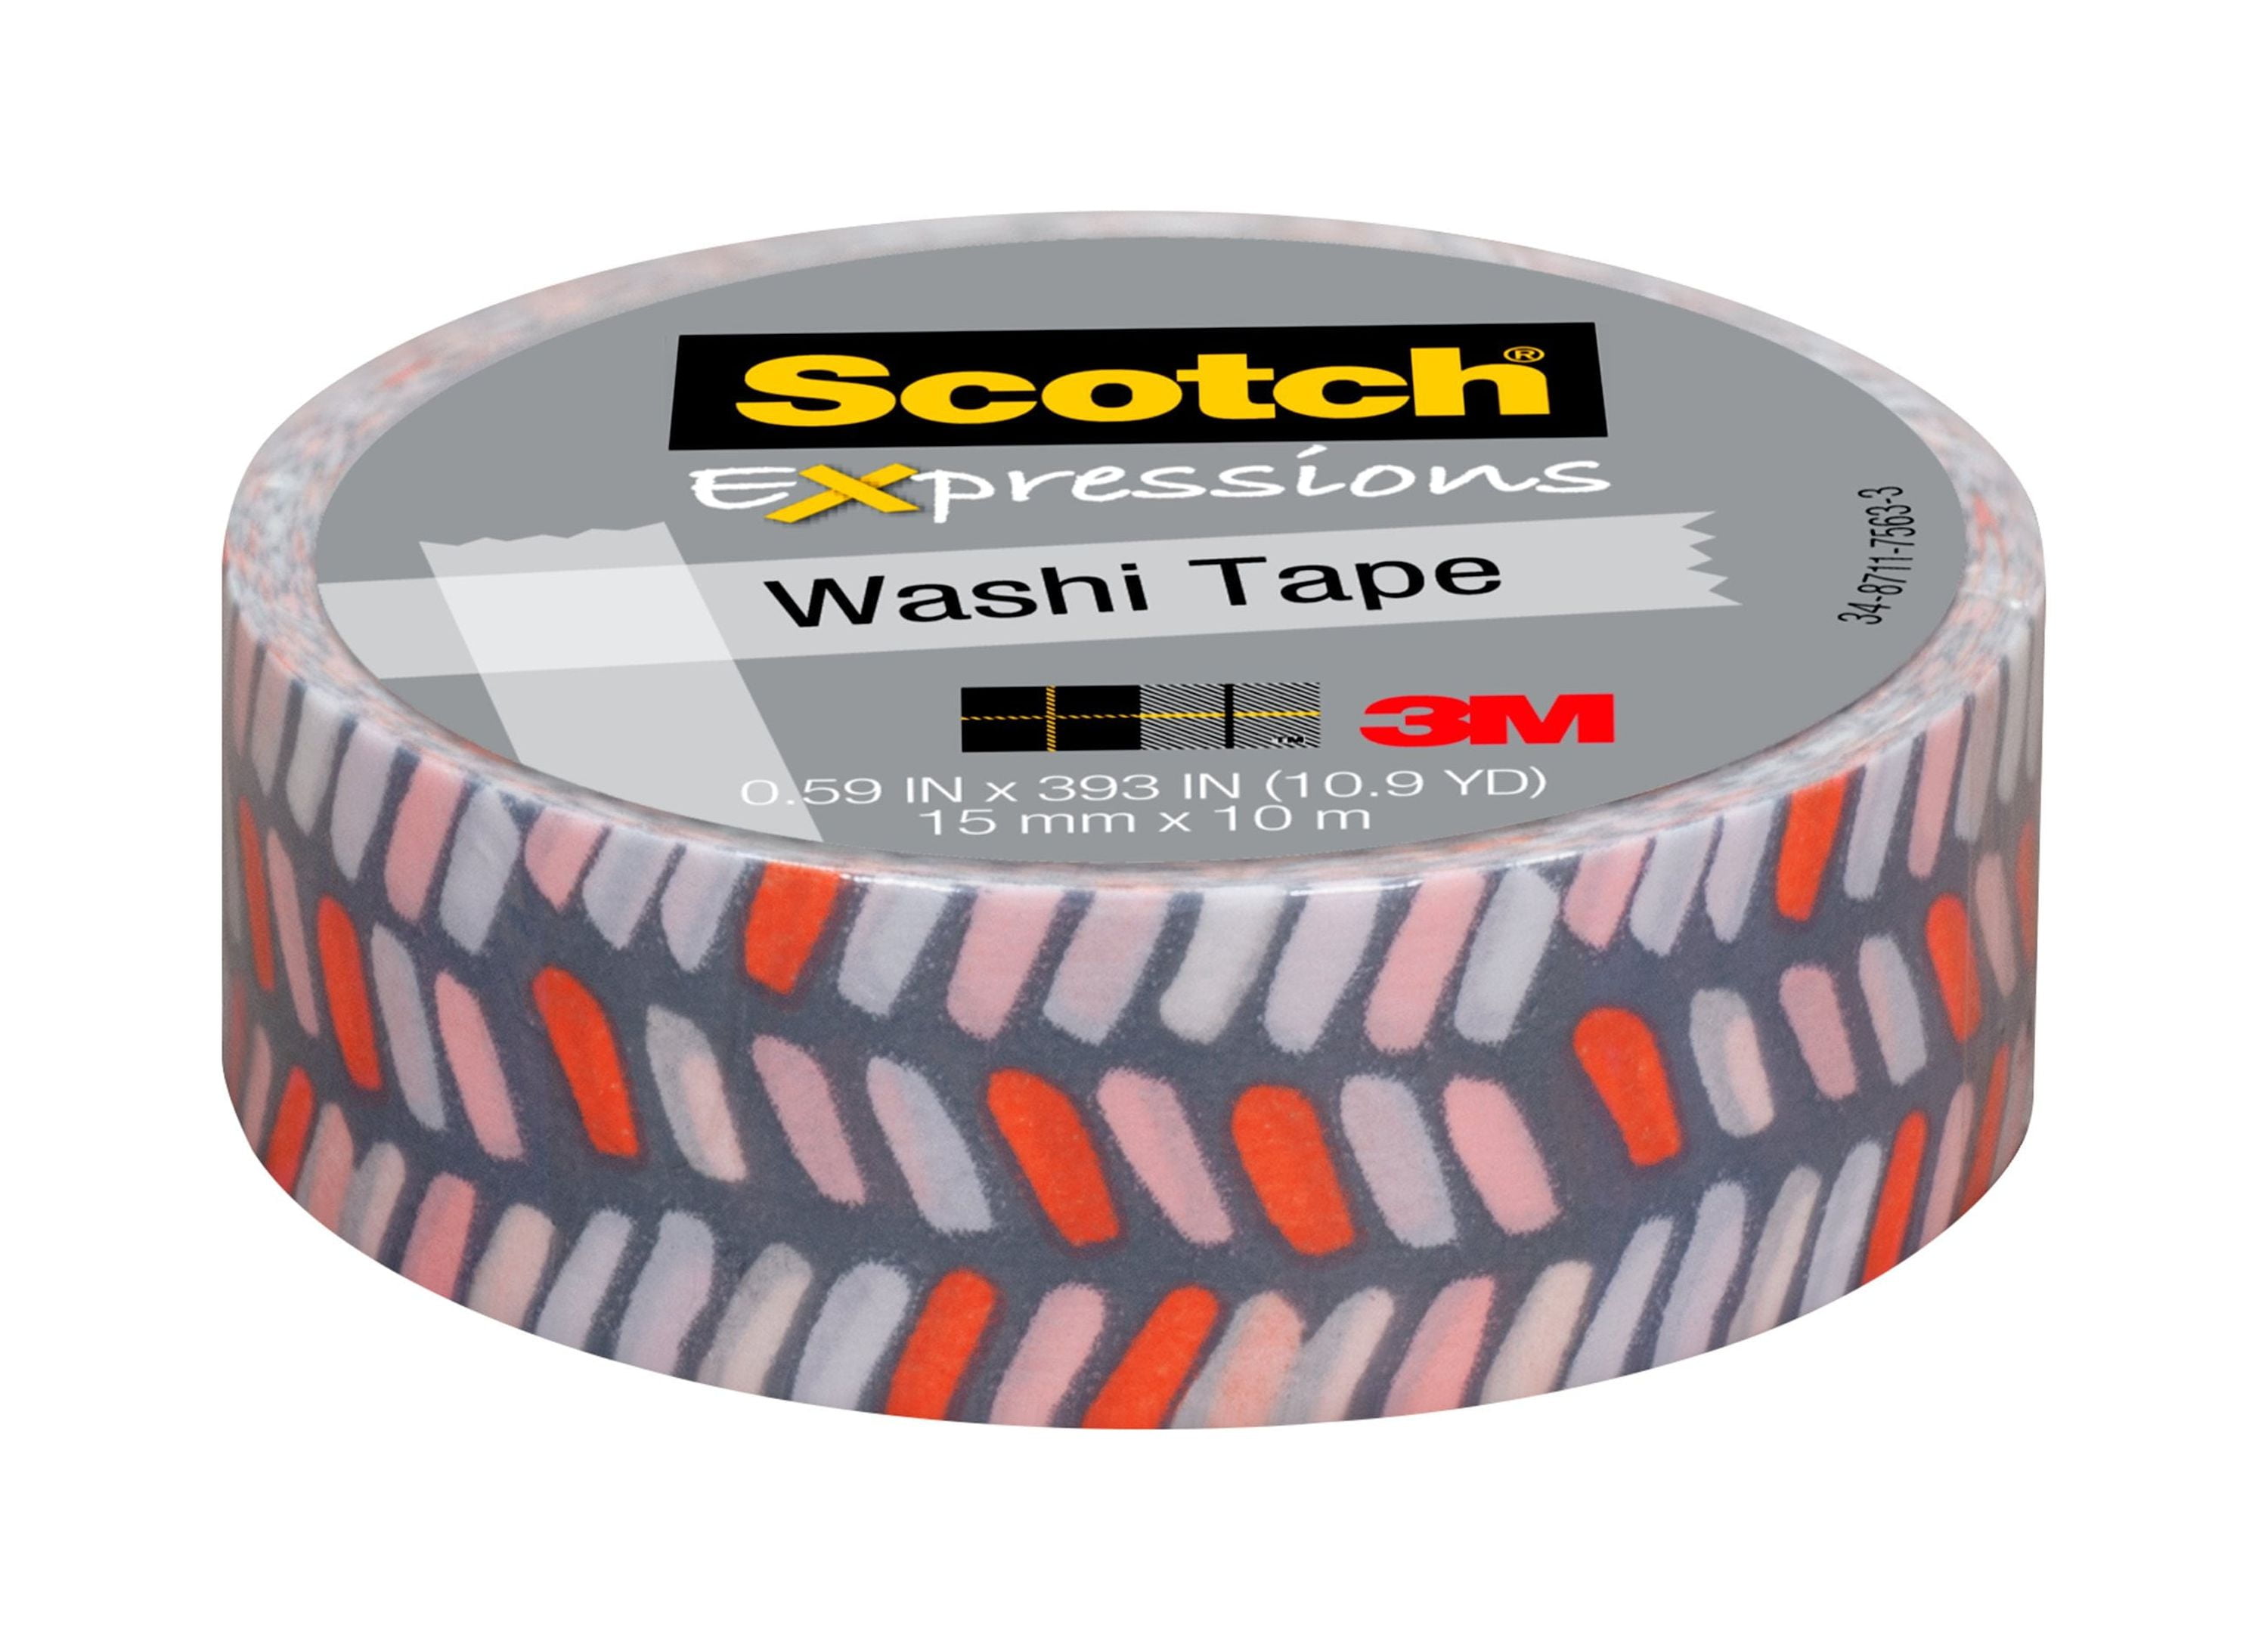 Scotch Expressions Washi Tape, Gray w/ Pink & Red .59 x 393, 1 Roll